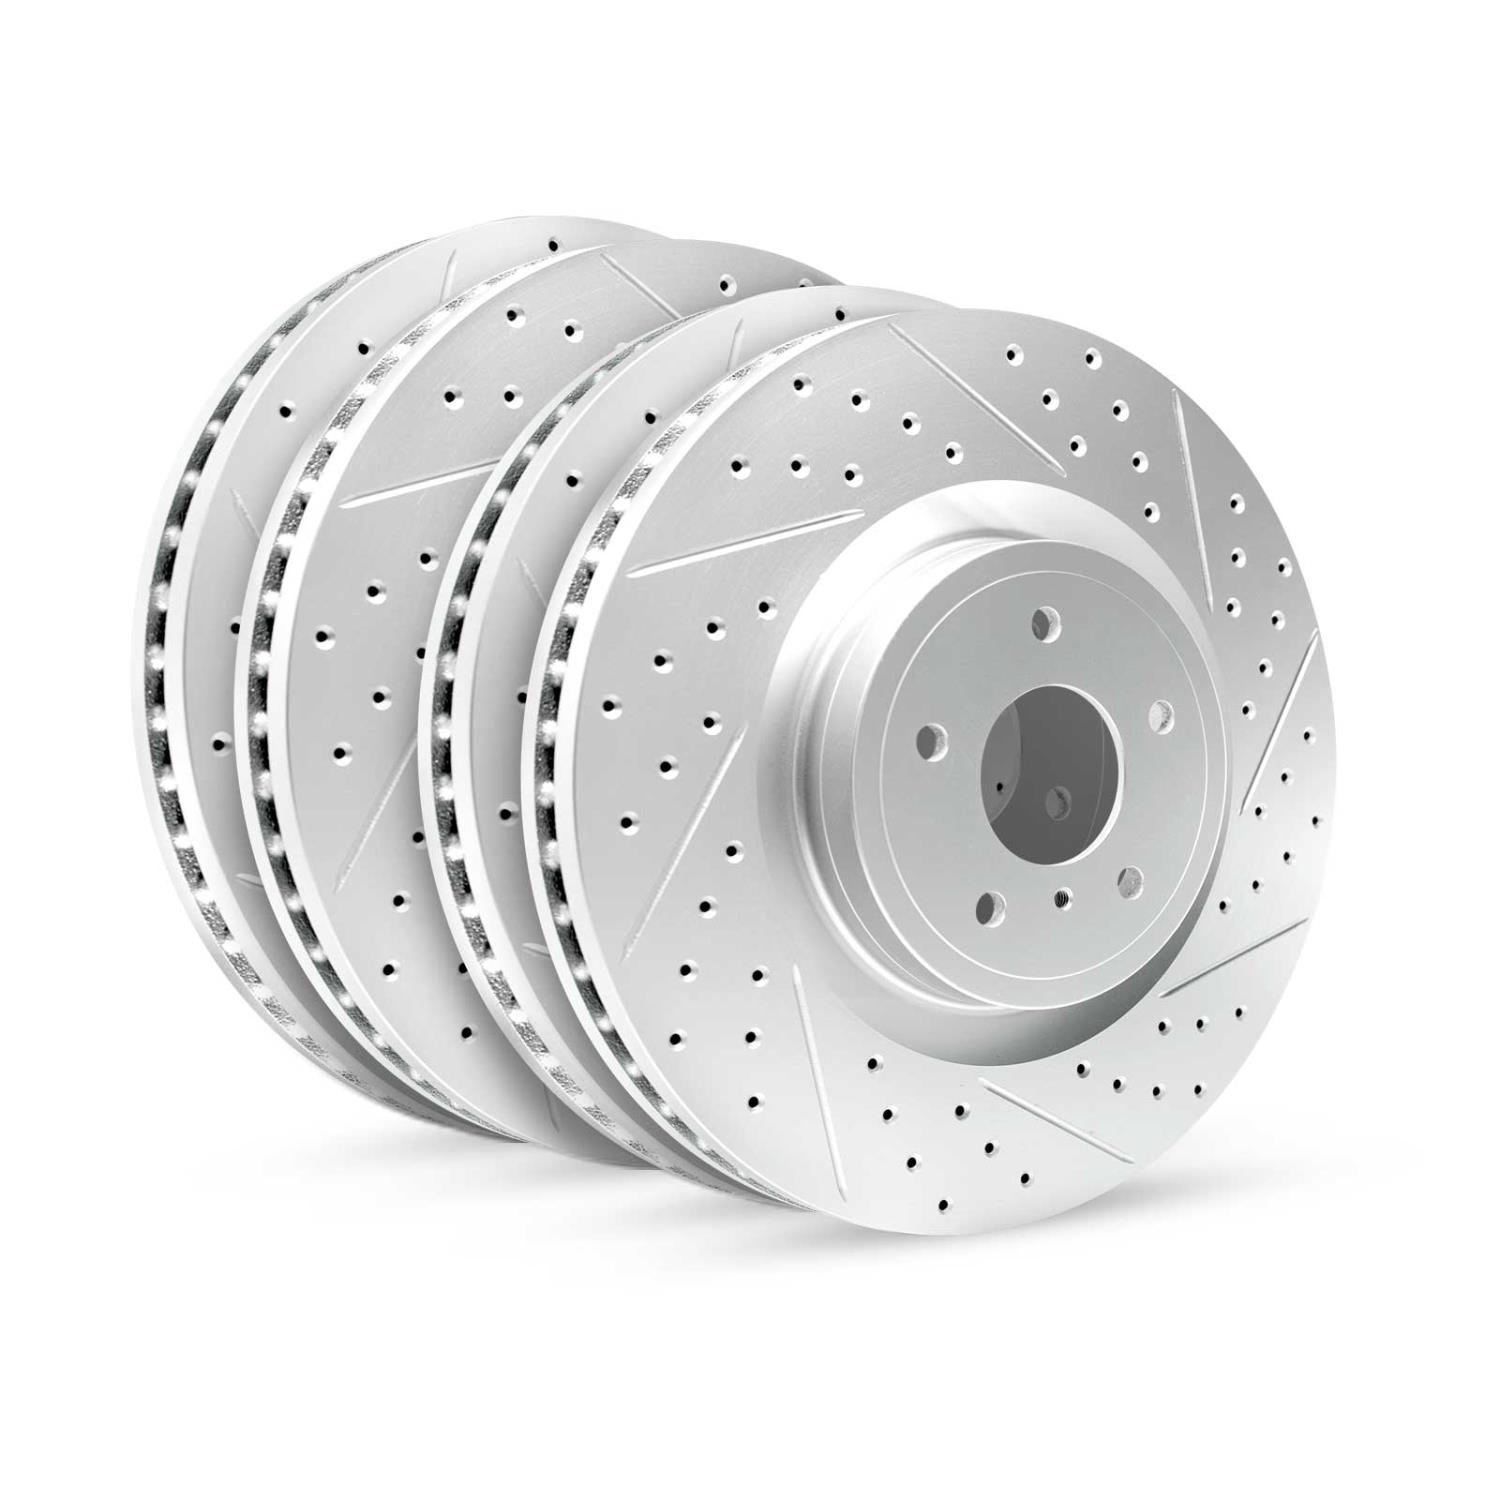 GEO-Carbon Drilled/Slotted Rotors, 2006-2006 BMW, Position: